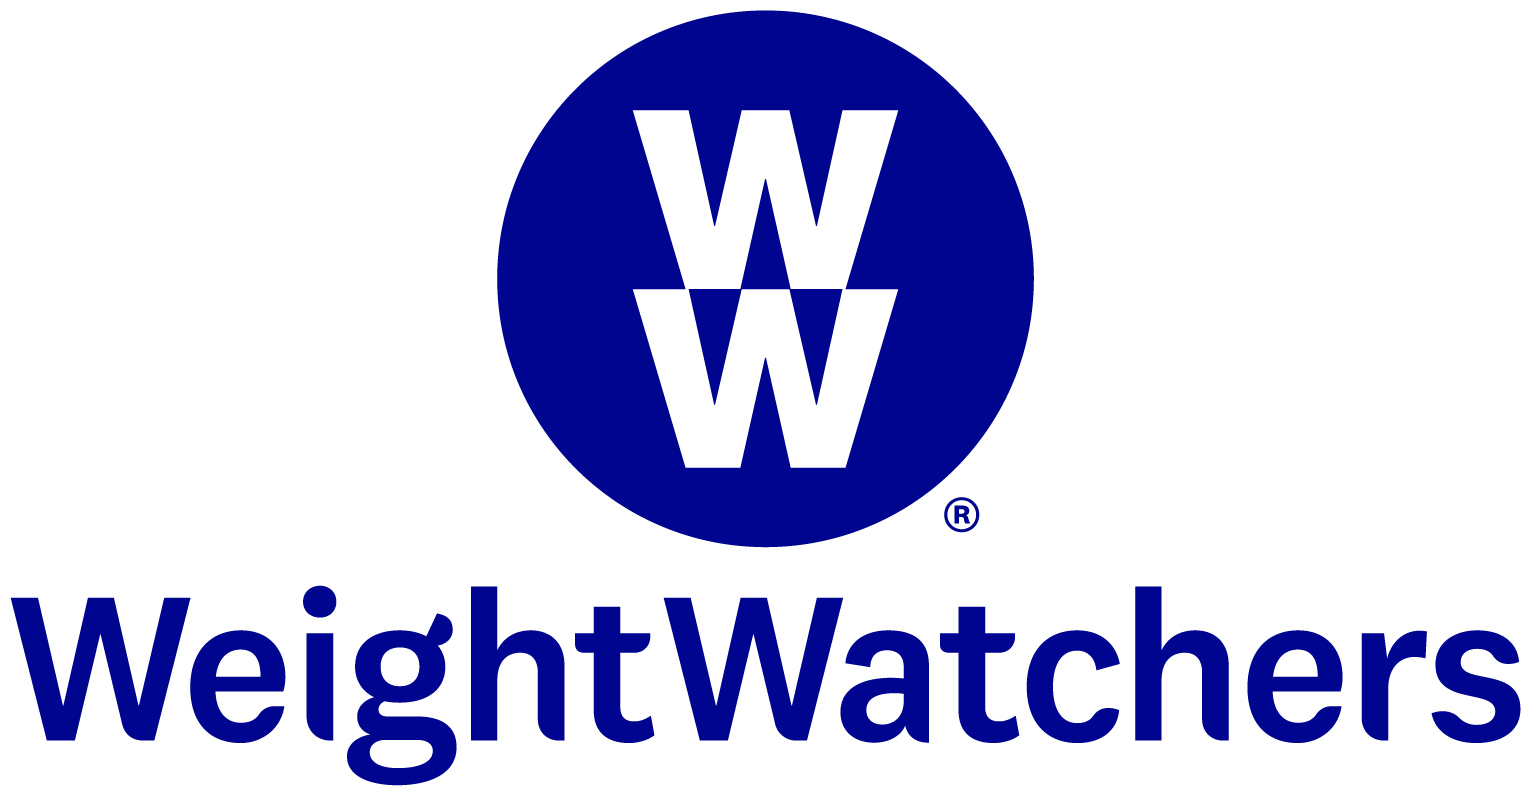 WW Review: Does the WeightWatchers weight-loss program work?